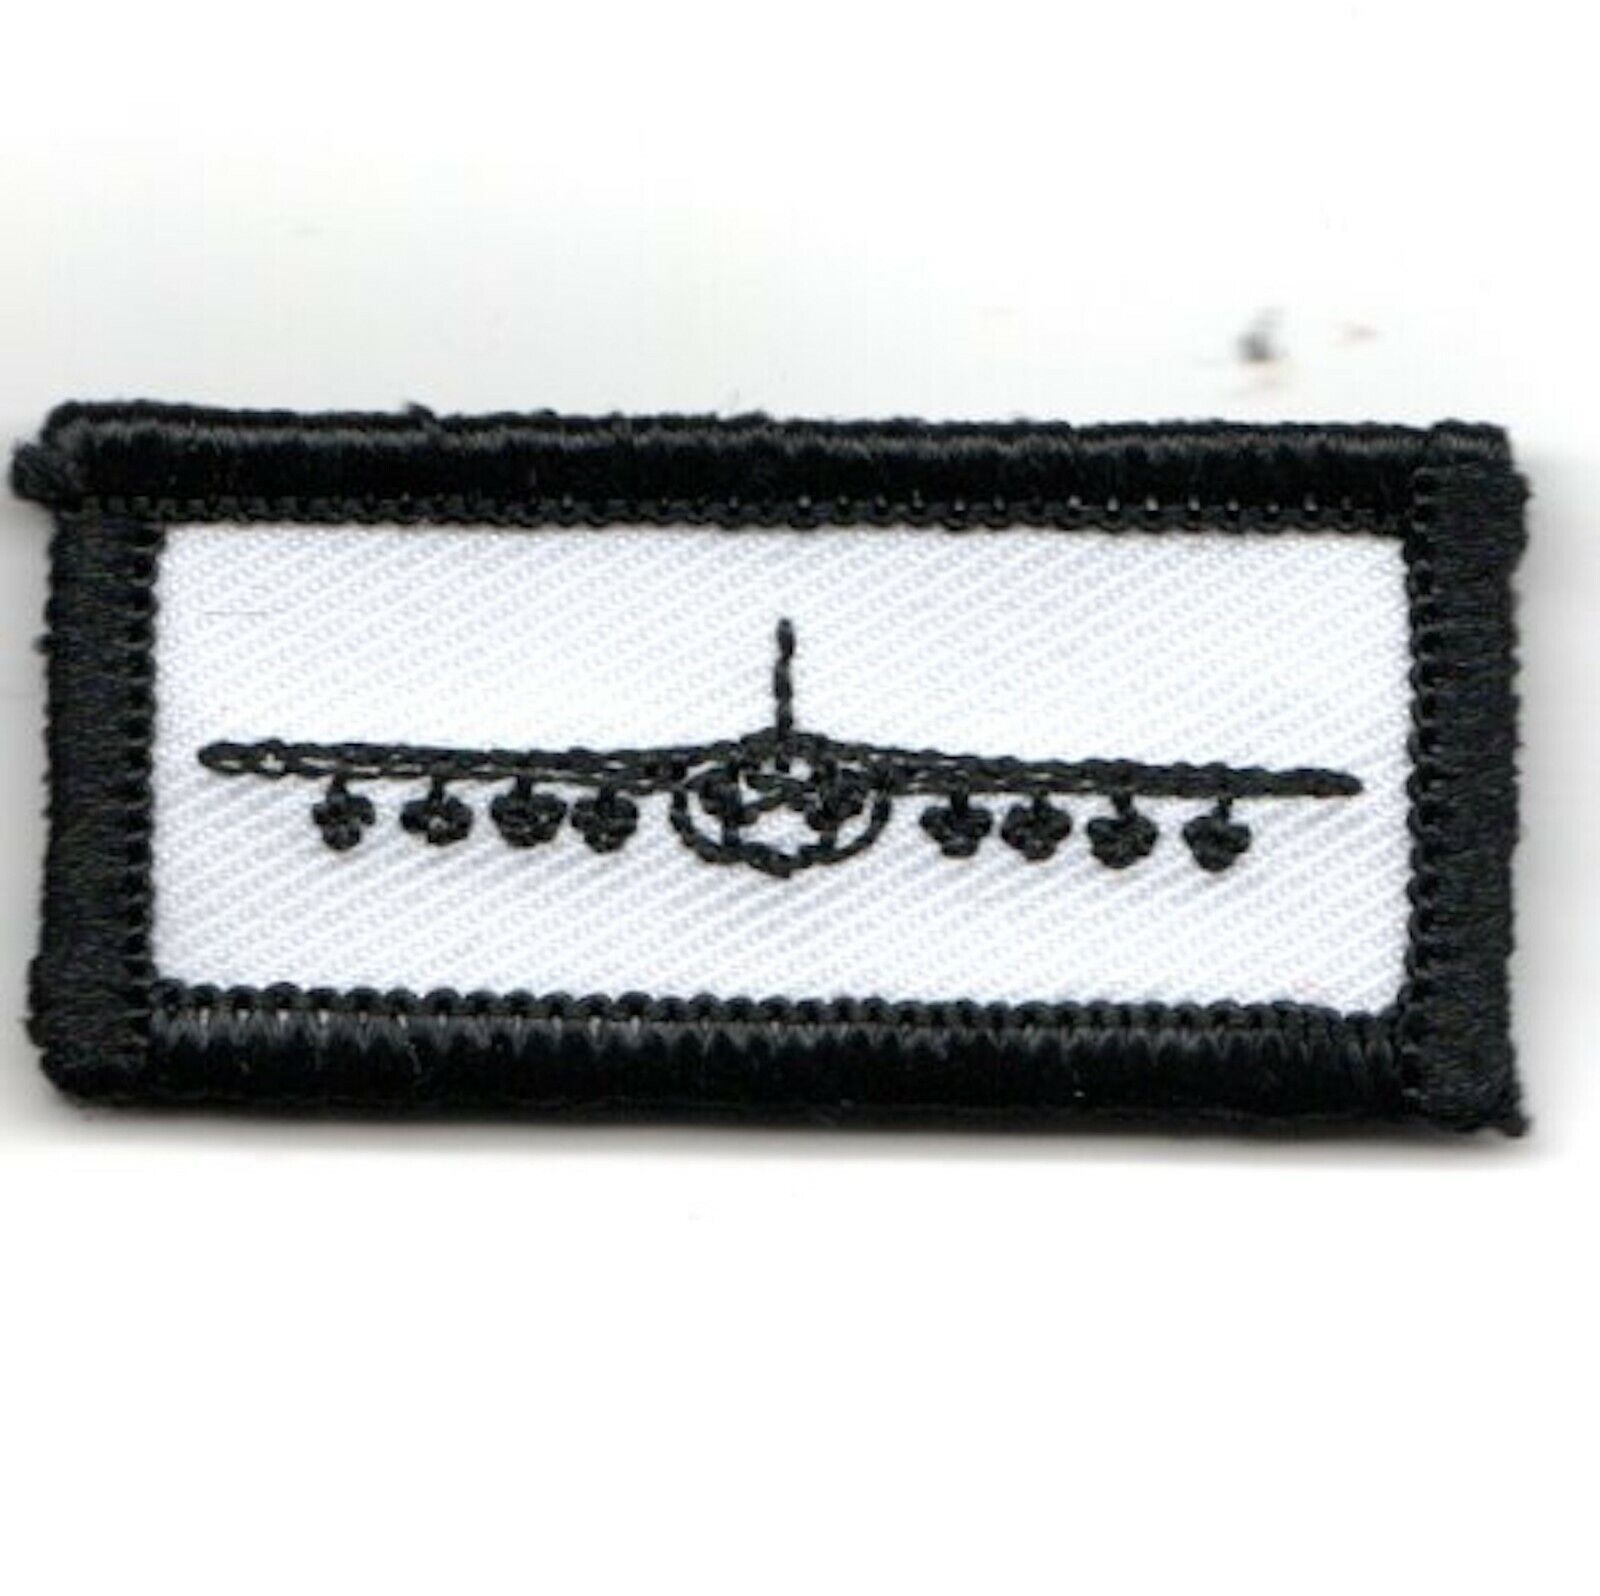 Navy VAQ-136 Fareast Growler A/C Japan Triangle Military Embroidered Patch